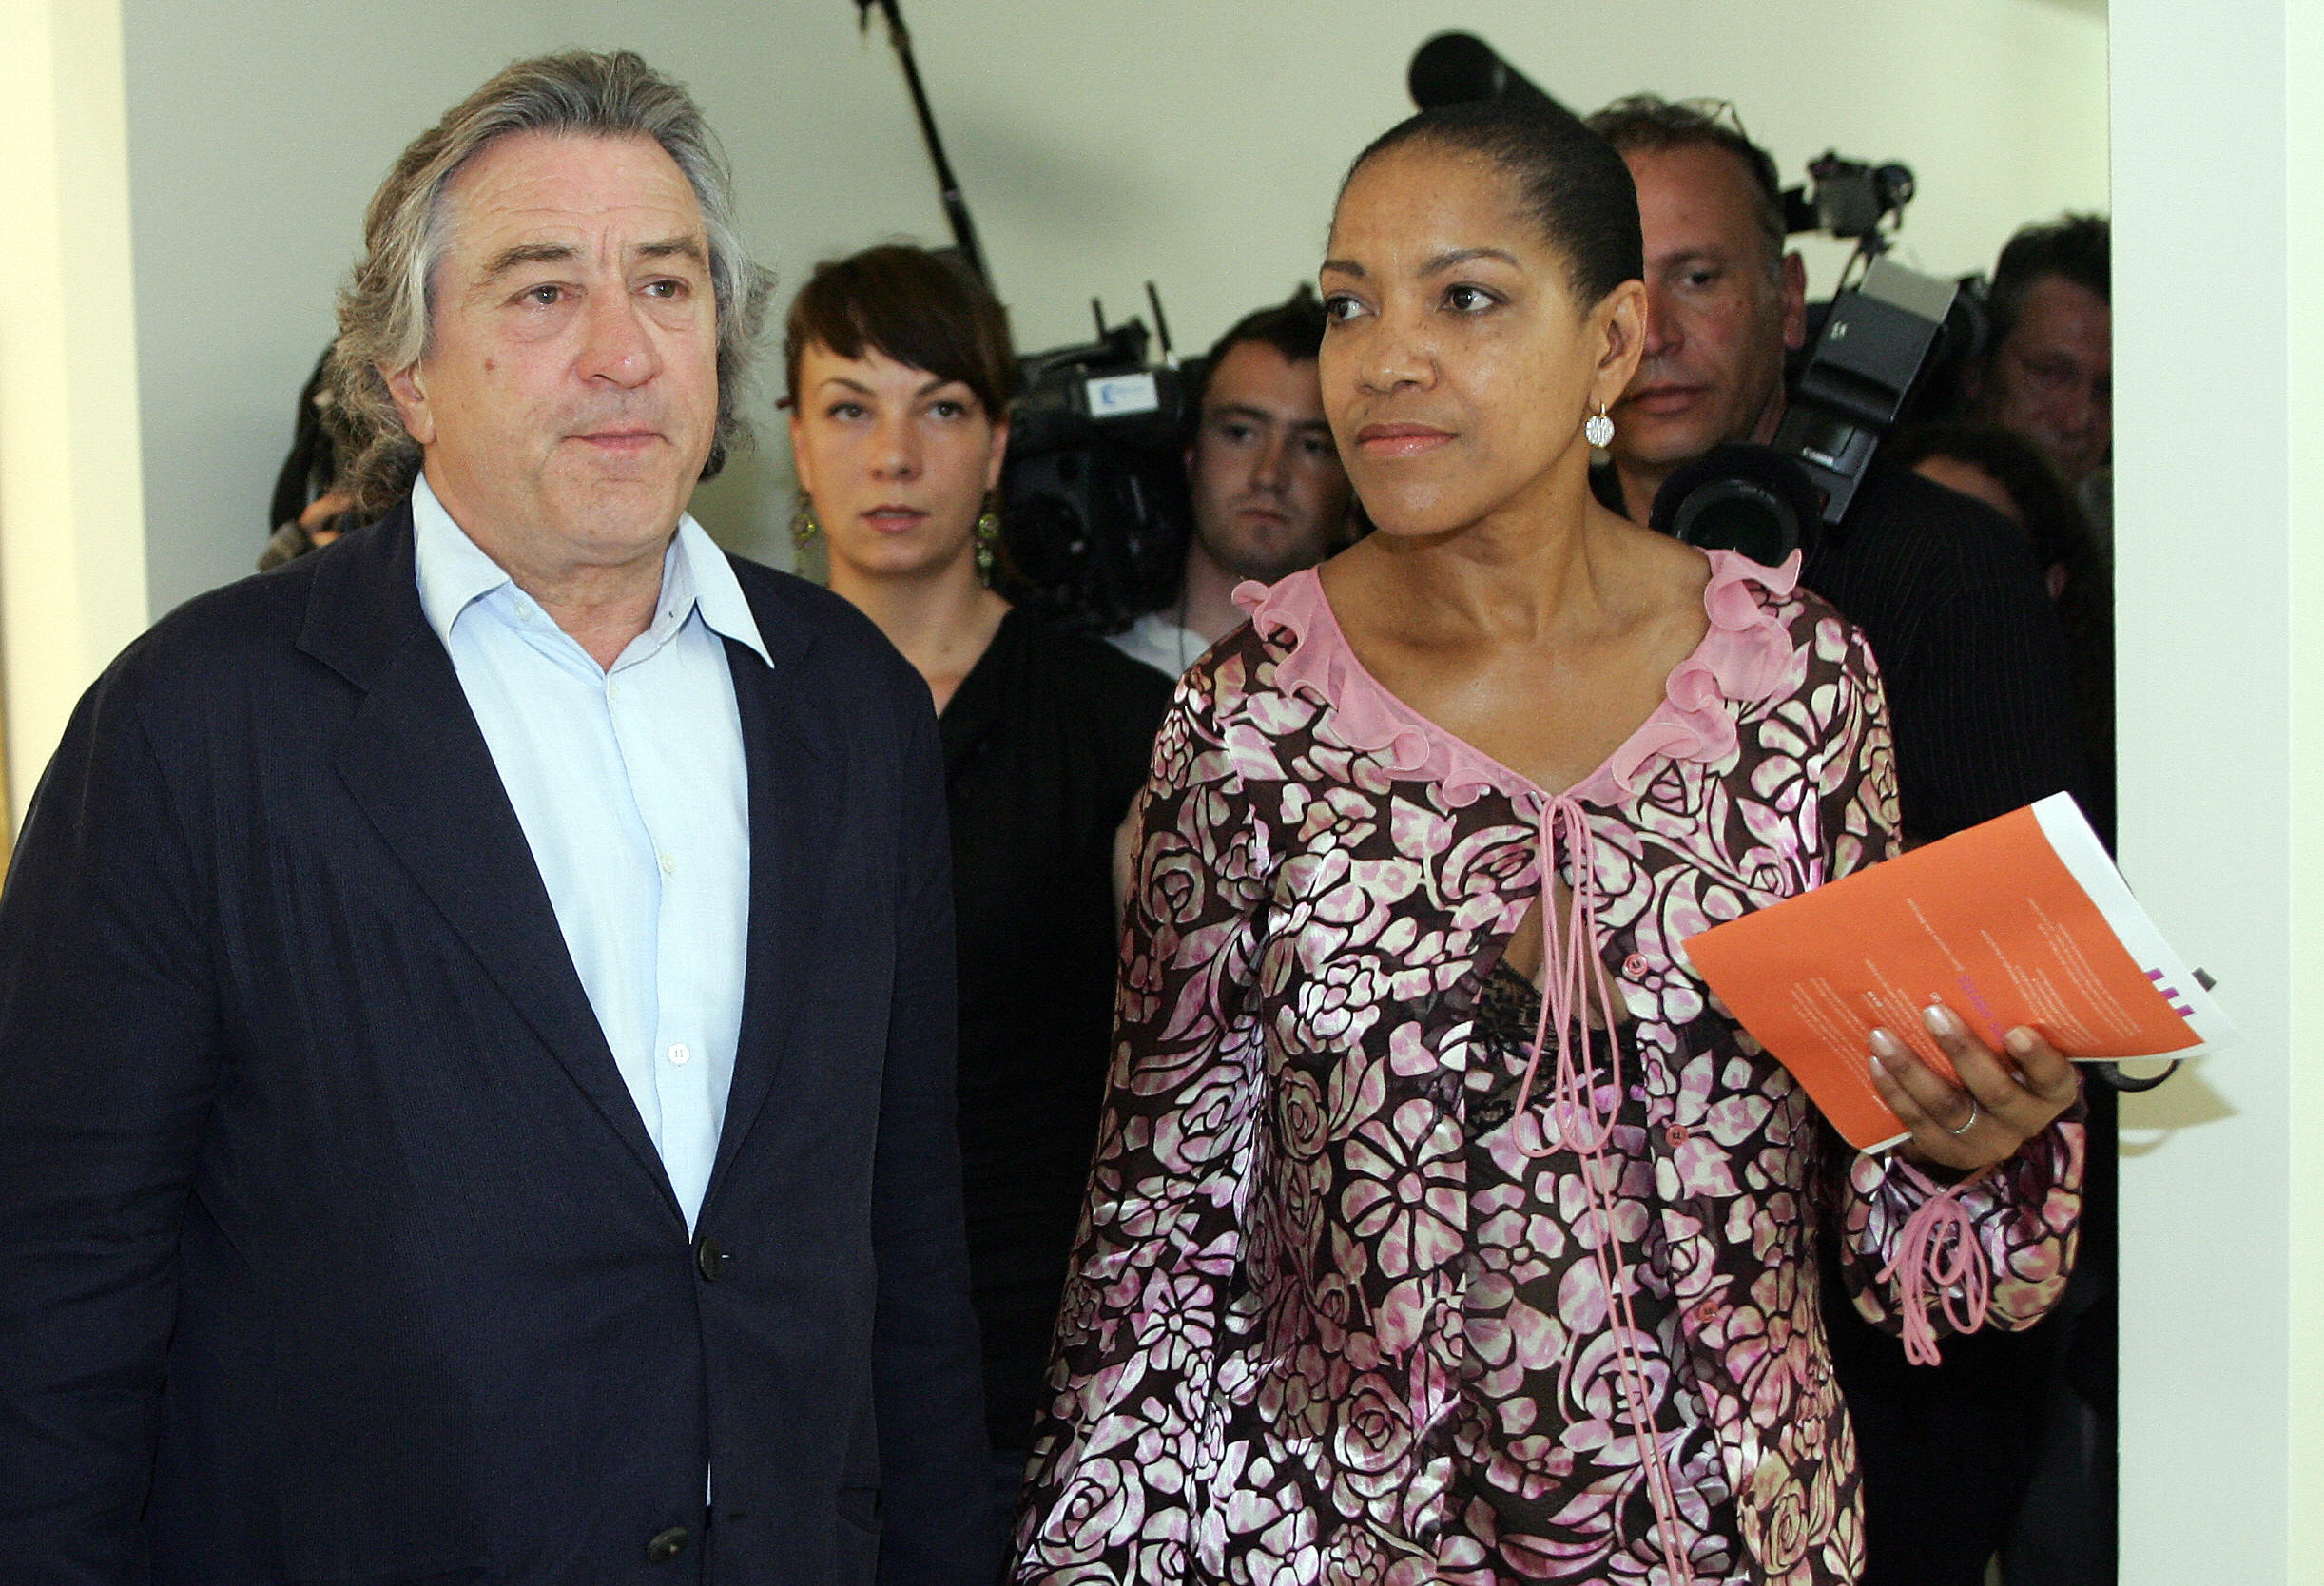 Robert De Niro arrives with his wife for a press conference on his late father, Robert De Niro Senior (1922-1993), painting exhibition, 18 June 2005 in "La piscine" museum in Roubaix (North of France) | Source: Getty Images